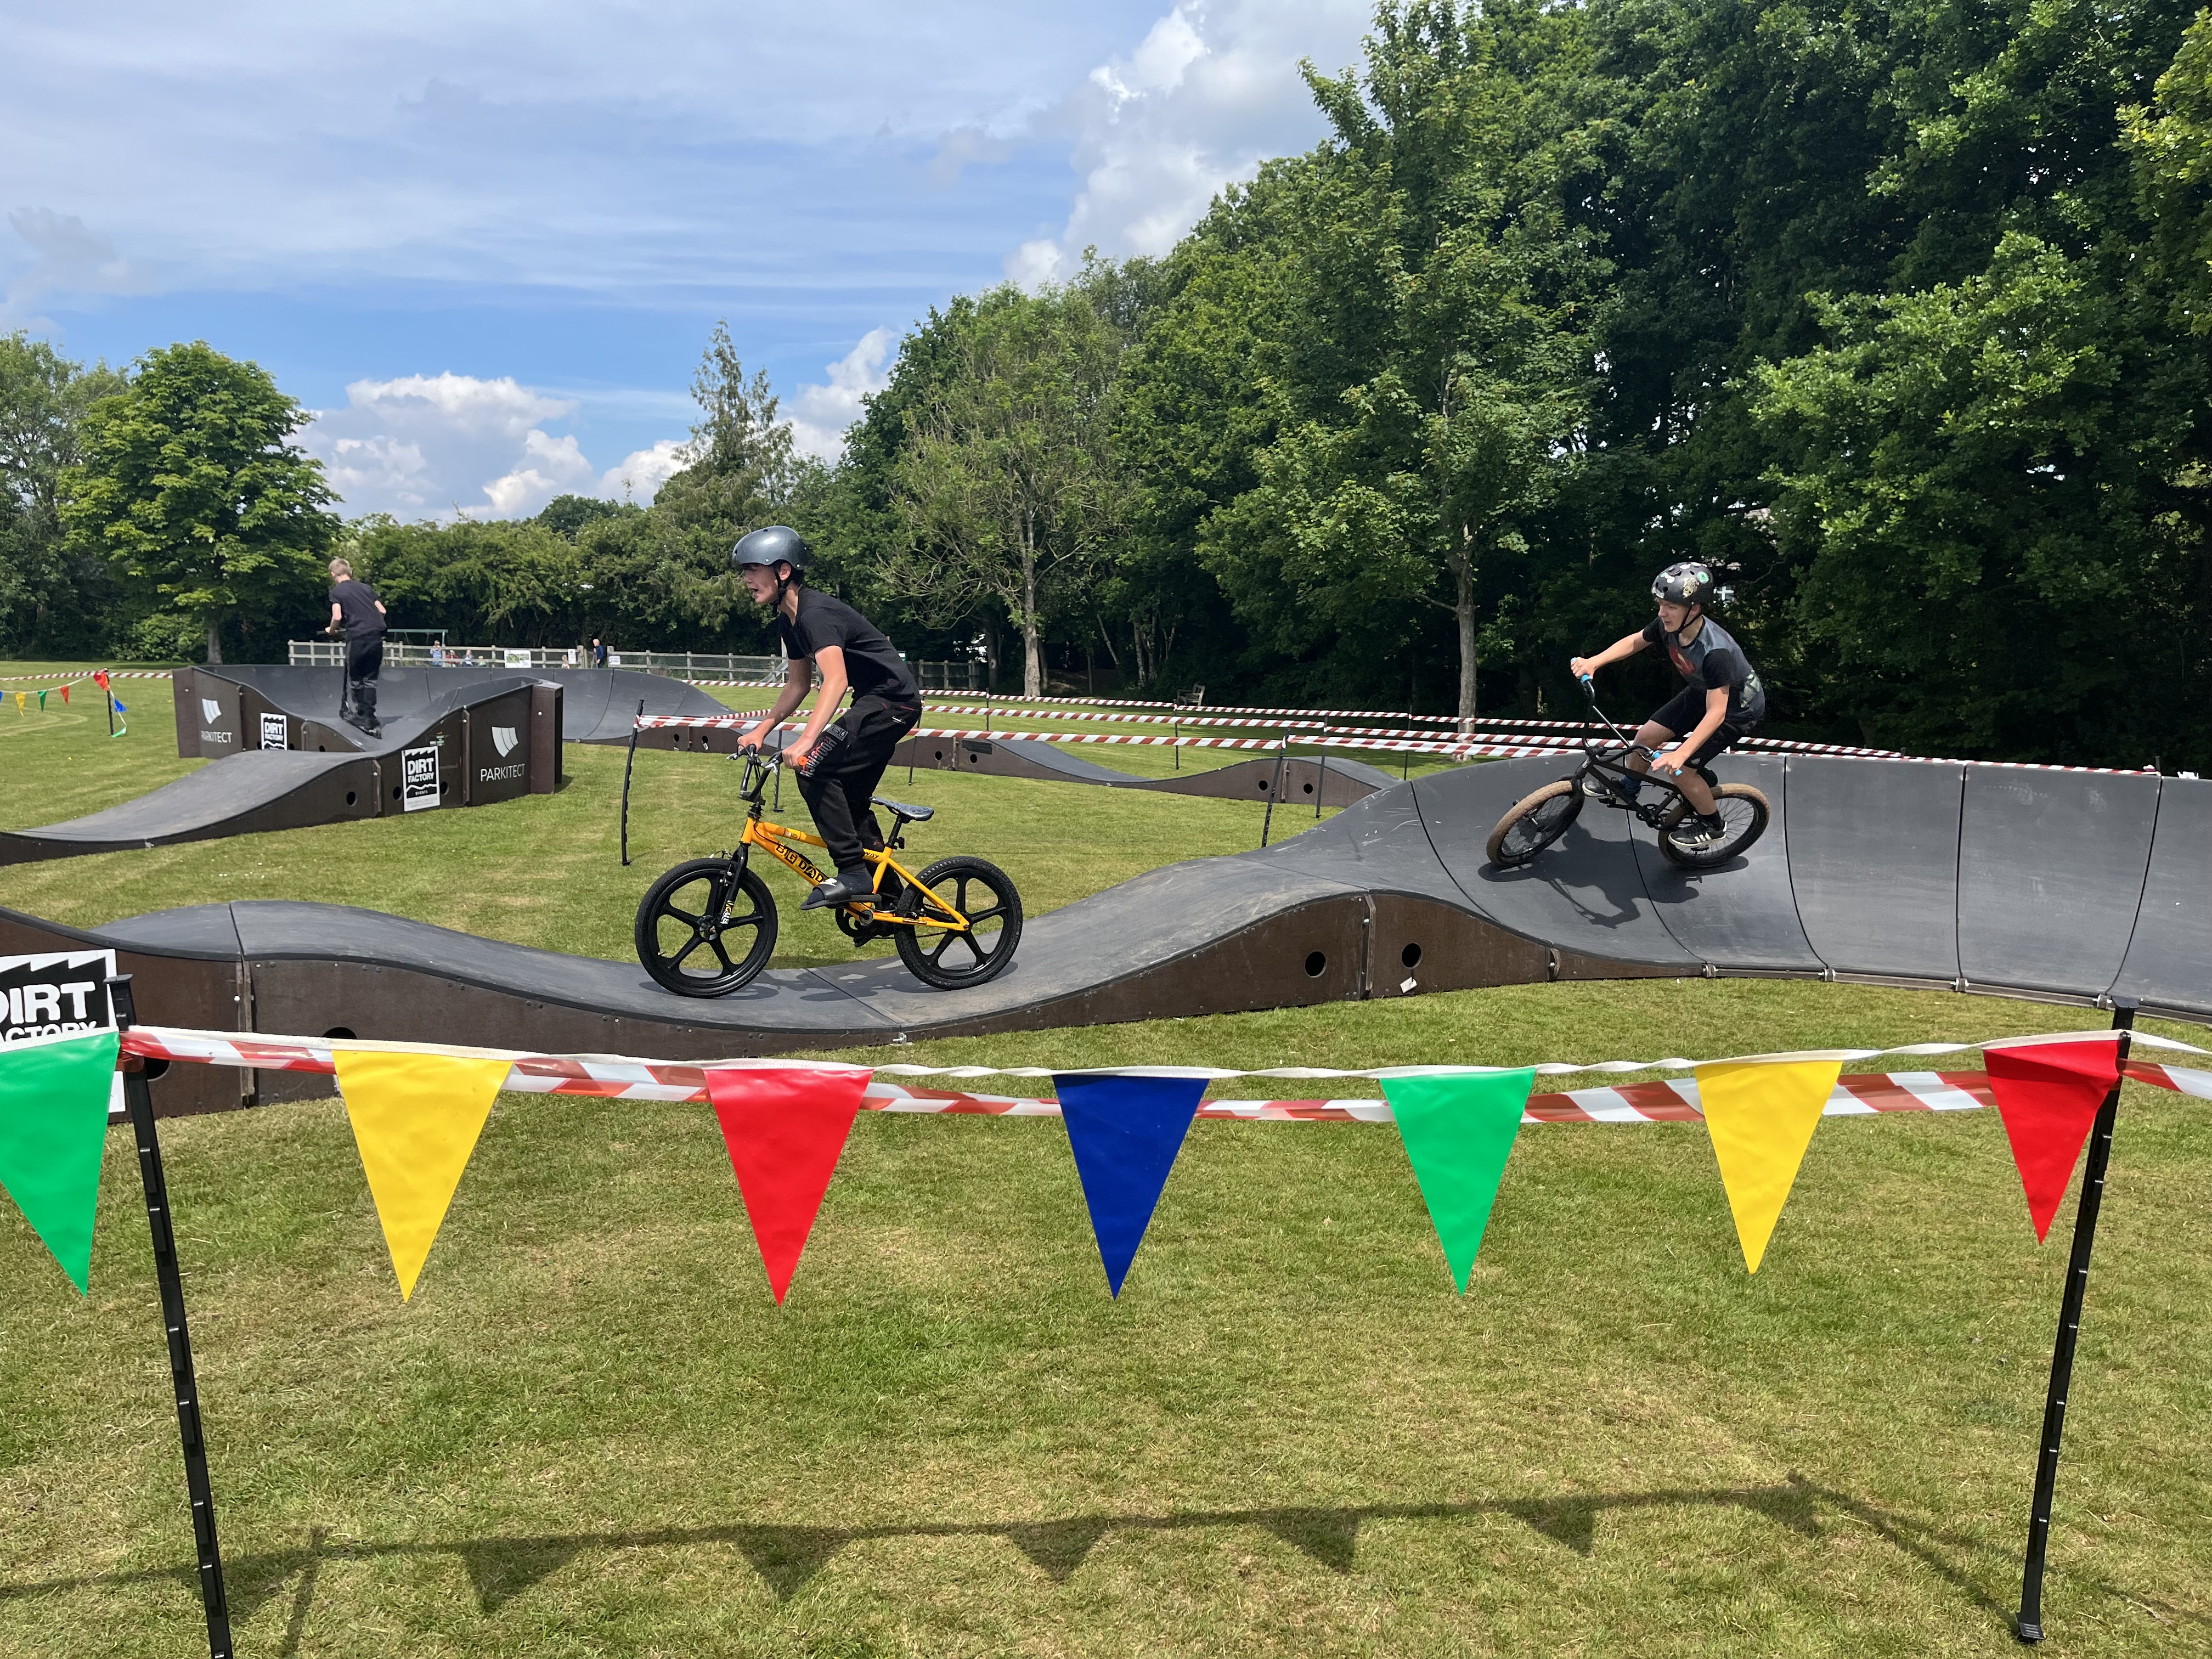 Pump Track Consultation launched today!